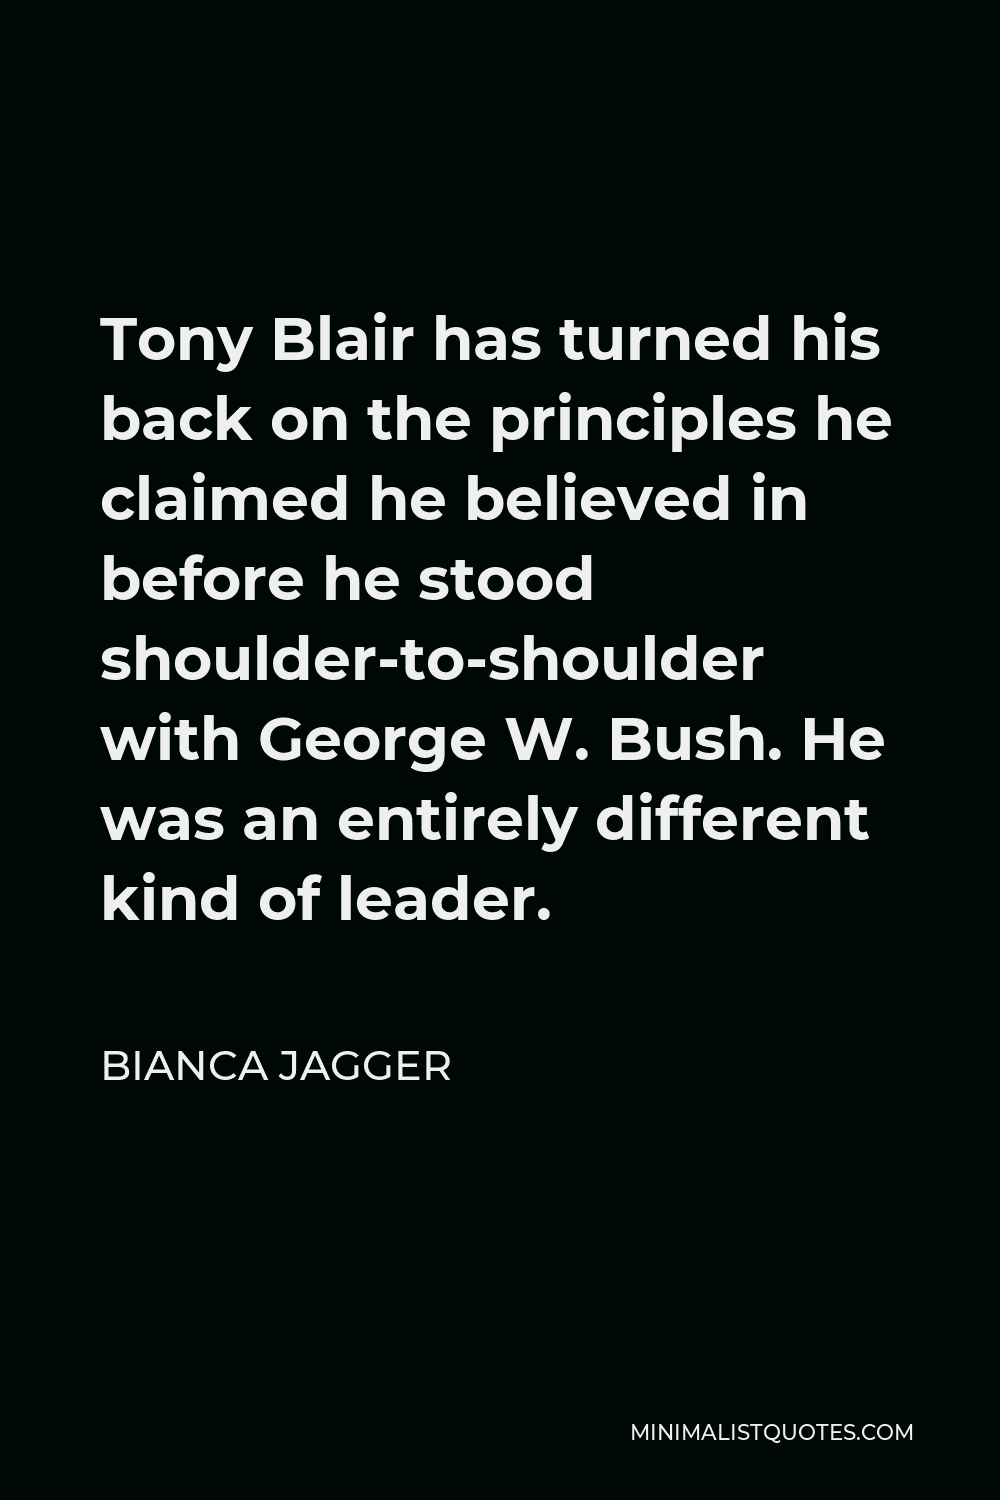 Bianca Jagger Quote - Tony Blair has turned his back on the principles he claimed he believed in before he stood shoulder-to-shoulder with George W. Bush. He was an entirely different kind of leader.